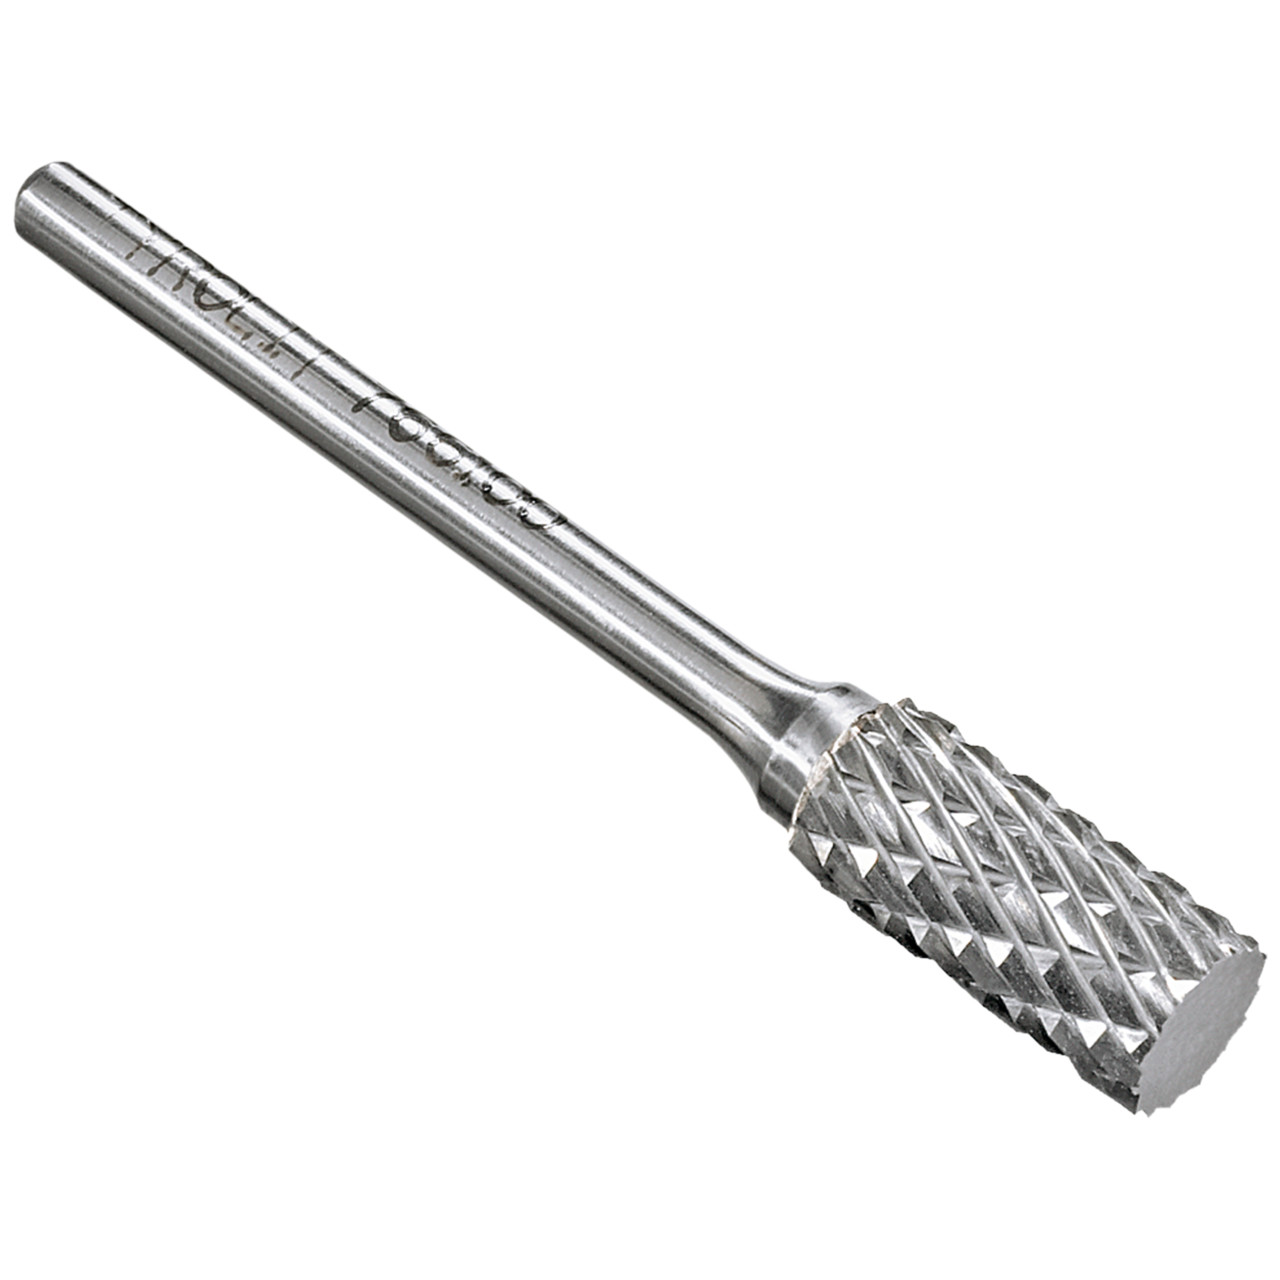 TYROLIT carbide end mill DxT-SxL 10x19-6x65 For cast iron, steel and stainless steel, shape: 52ZYA - cylinder, Art. 766108